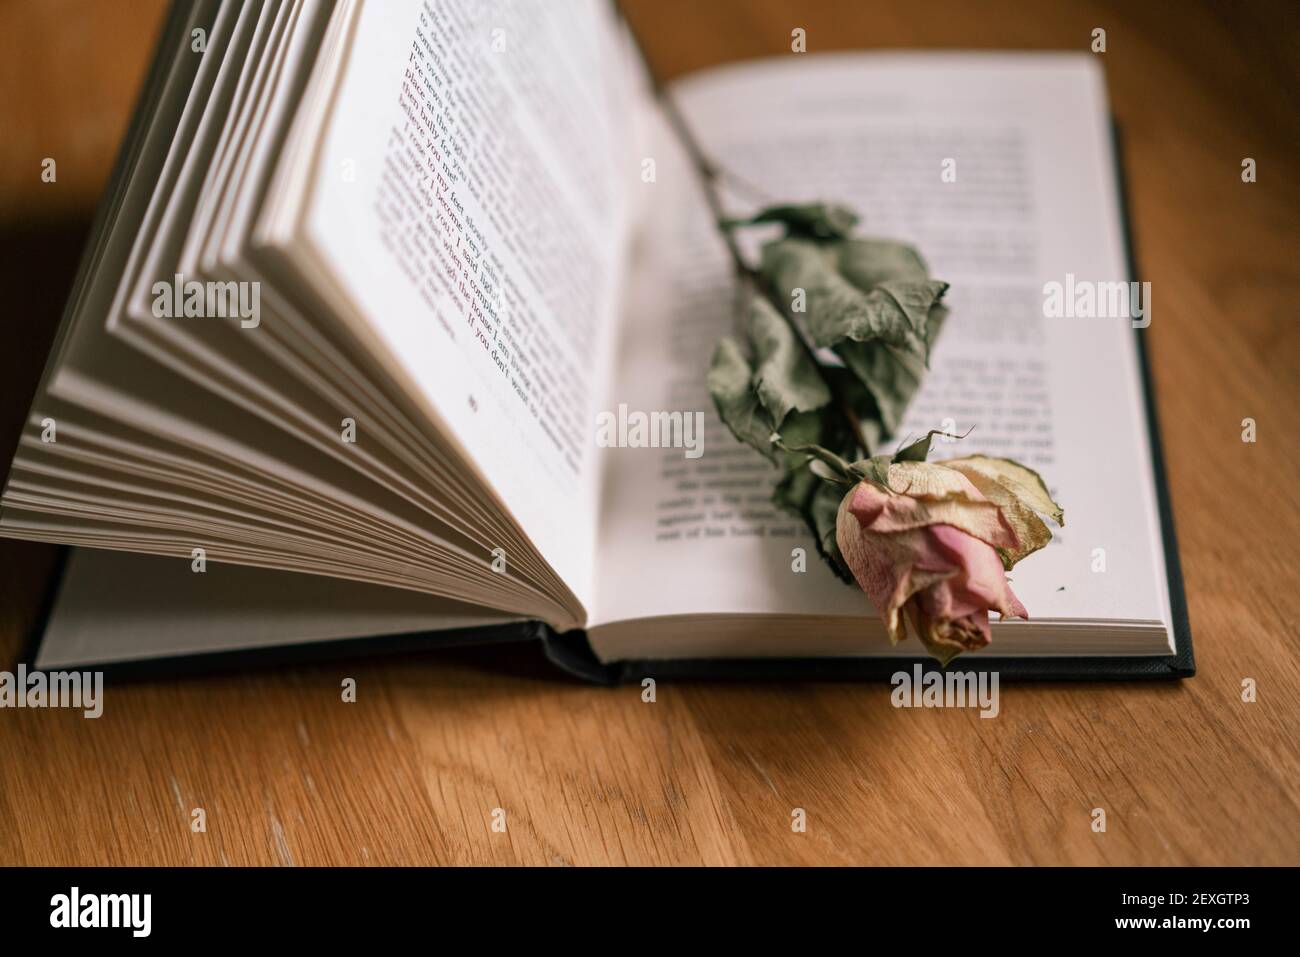 Single dying rose on opened book Stock Photo